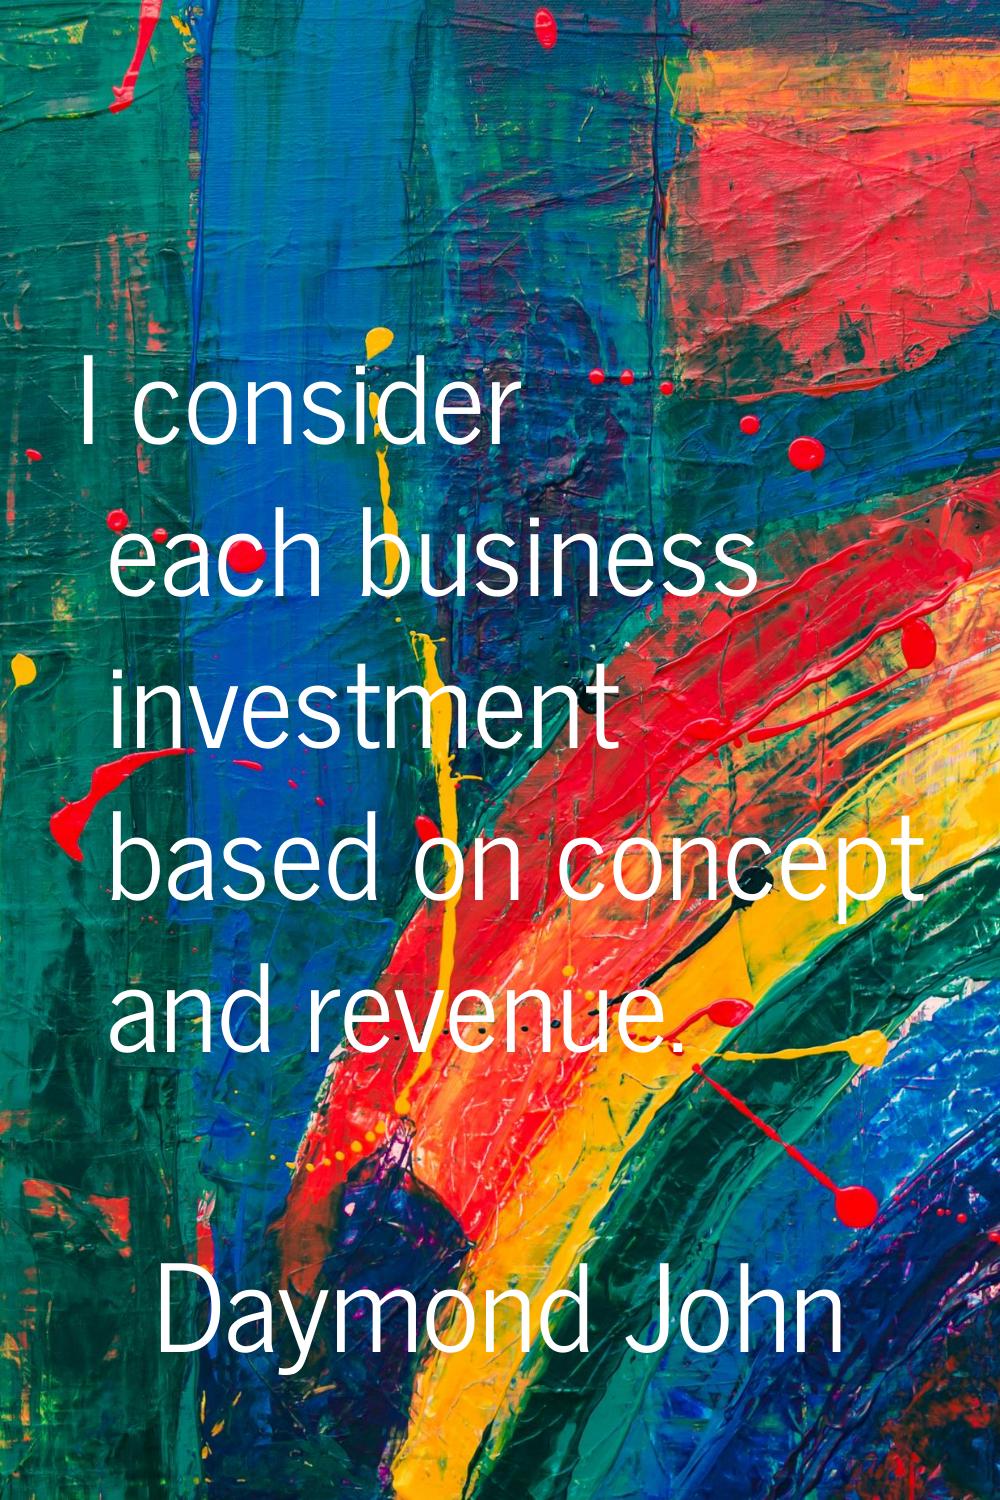 I consider each business investment based on concept and revenue.